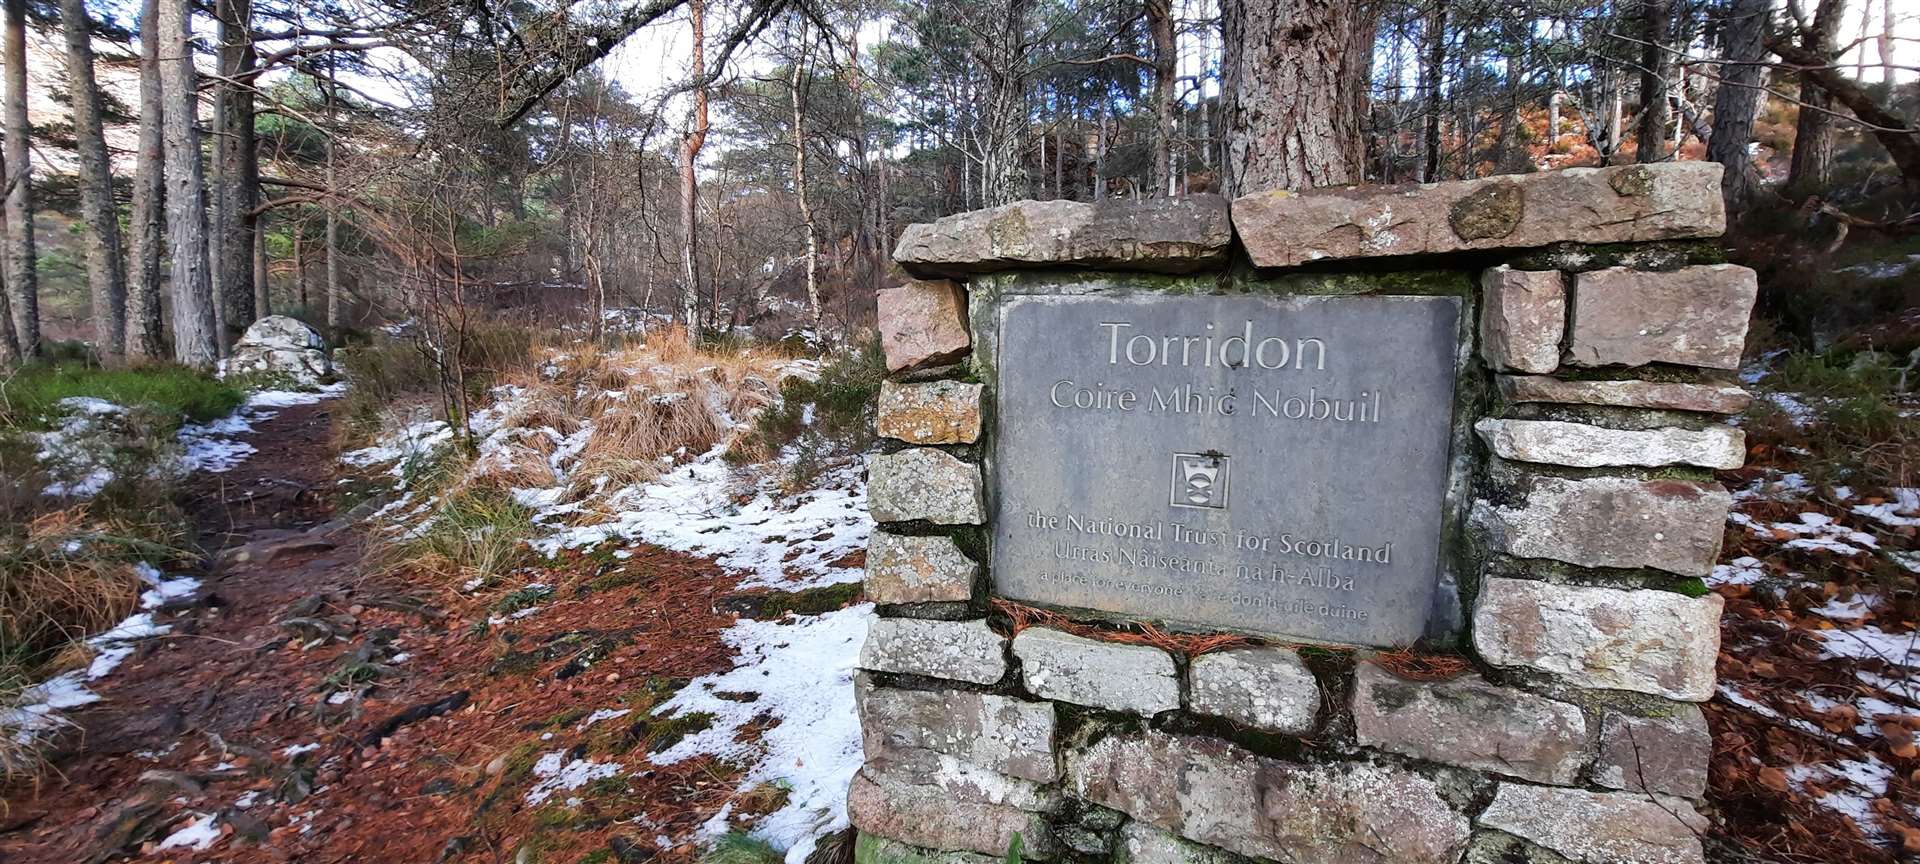 A National Trust for Scotland marker at the start of the path.